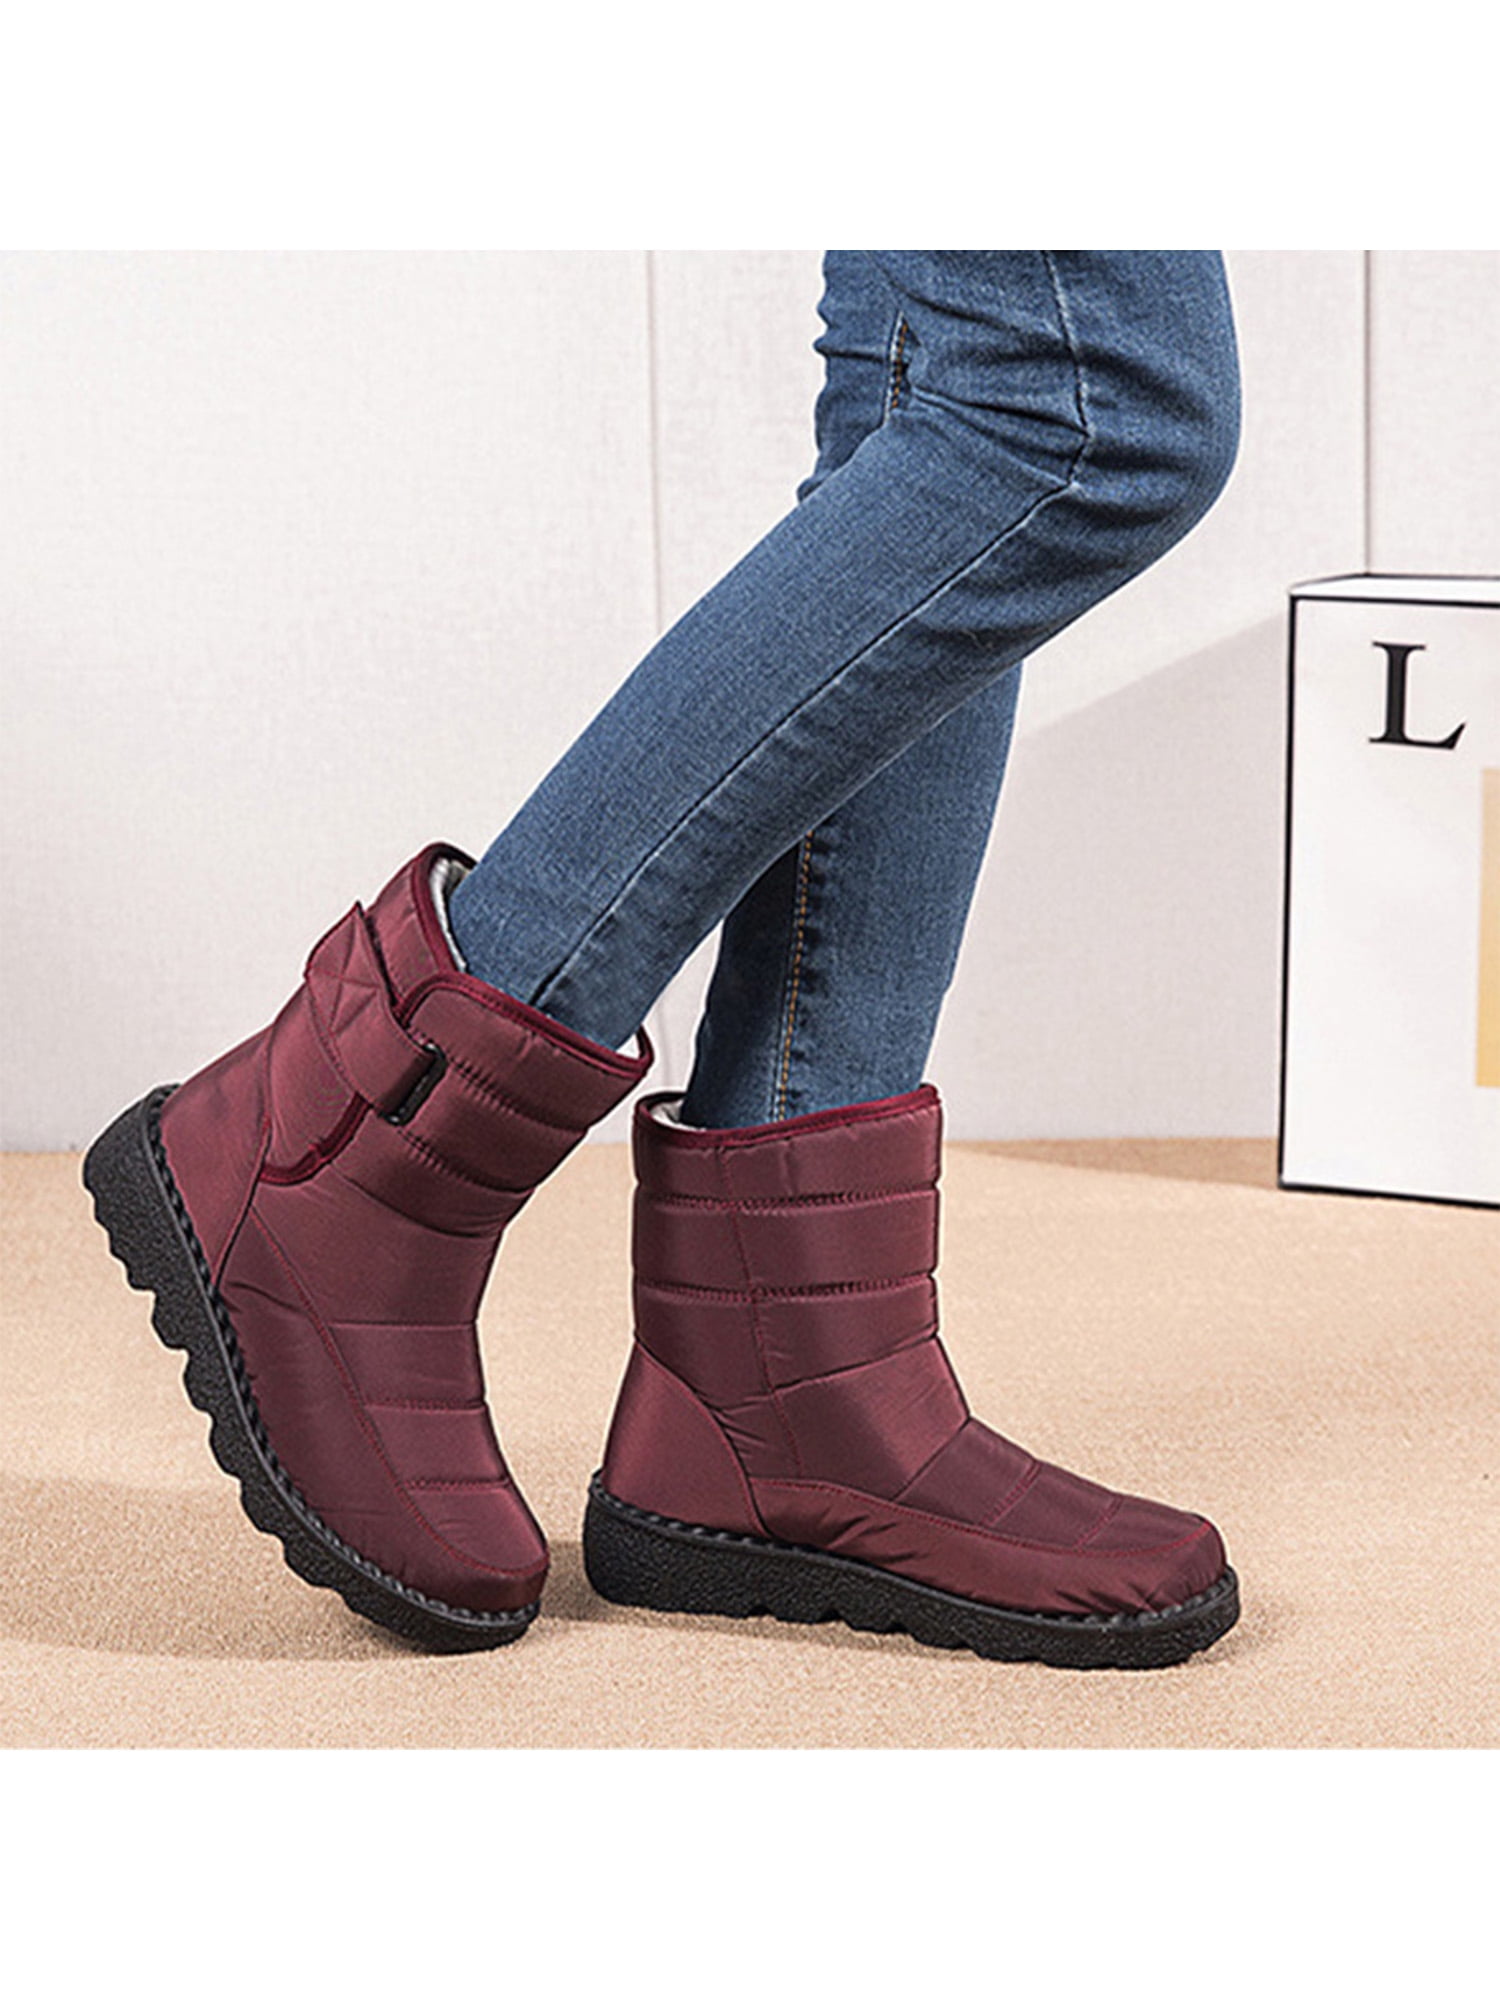 Winter Boots Rubber Fur Fashion Warm Wedges Women Snow Boots Hook & Loop Shoes